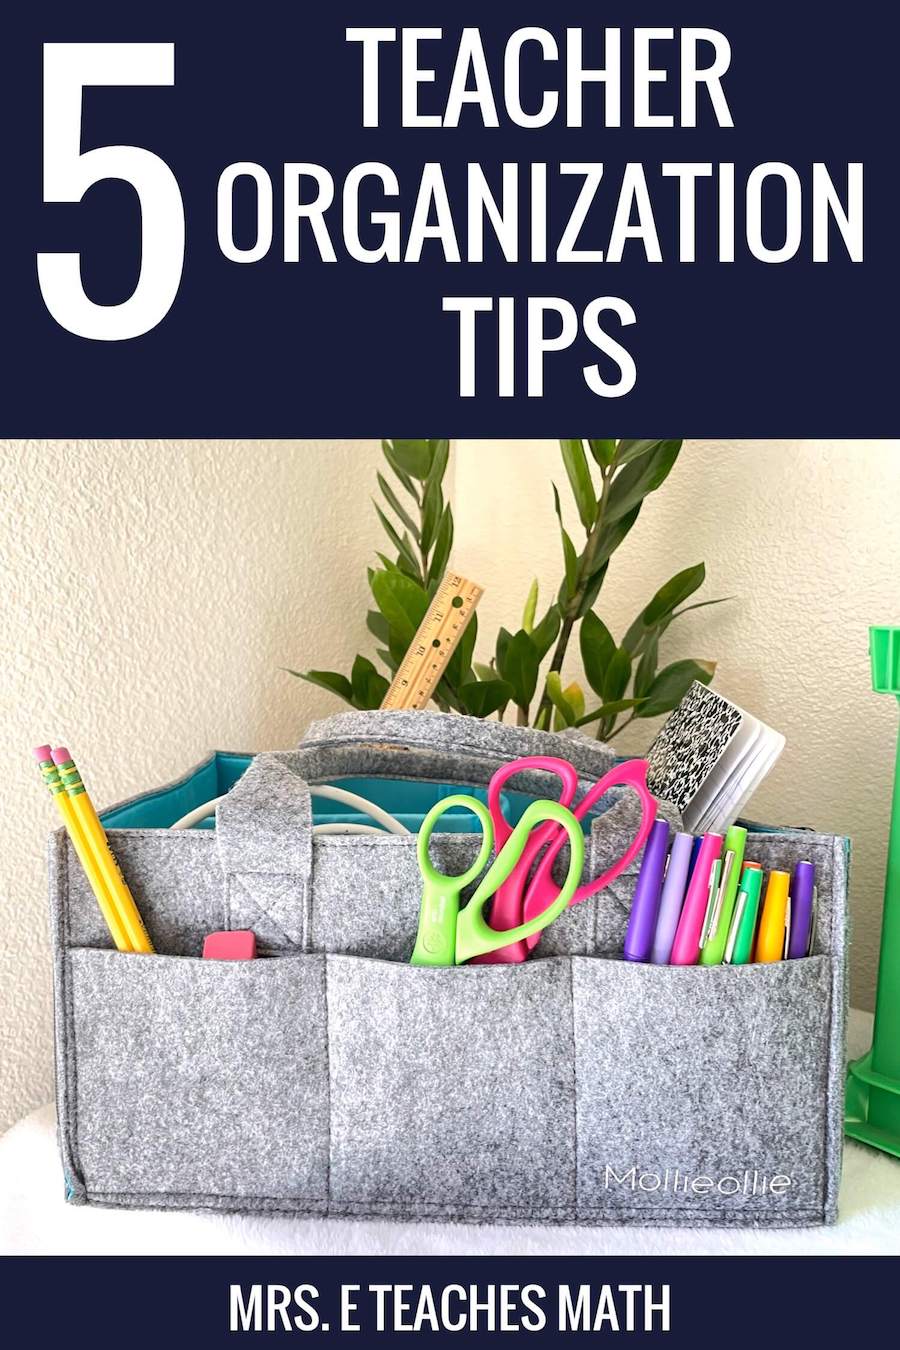 Organize Your Special Education Classroom with a DIY Velcro Board